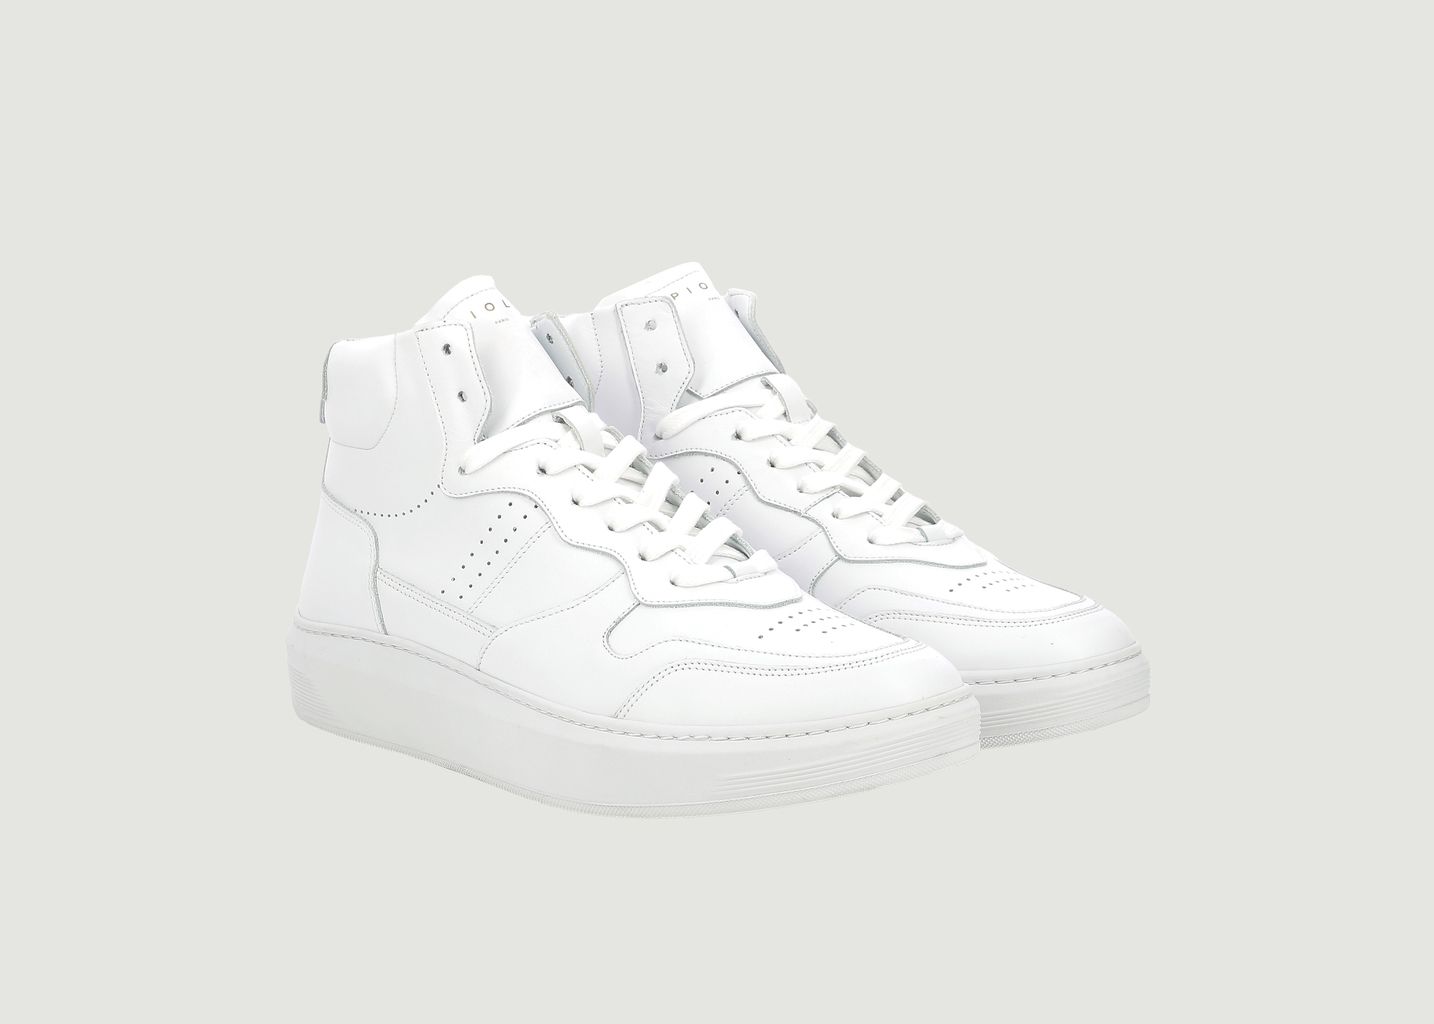 Cayma high sneakers - Piola